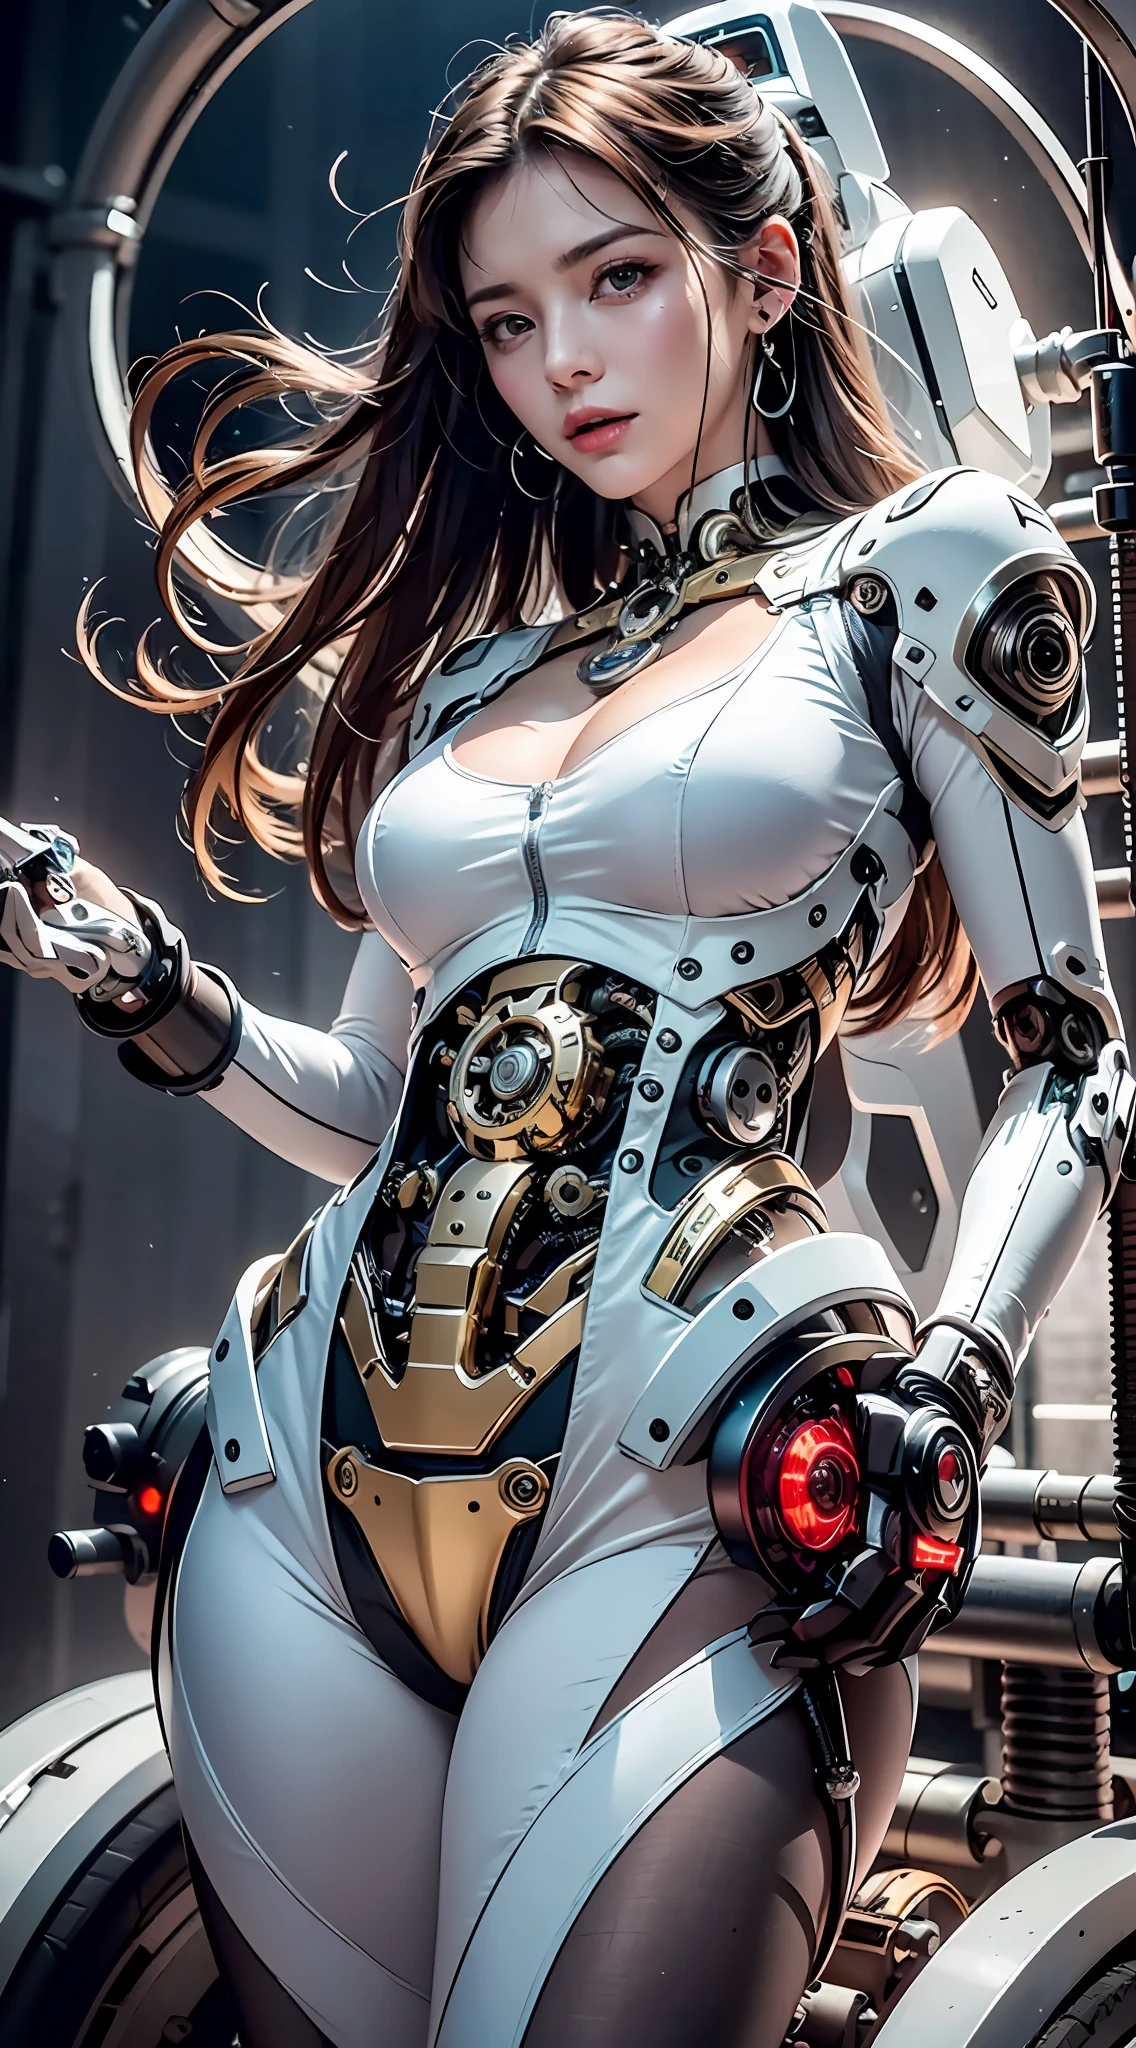 best qualtiy， tmasterpiece， Ultra-high resolution， Rendered with camera-like realism， real photograph，(((( A mechanical girl))))，((独奏))，(((full bodyesbian))),((Perfect facial features，delicated face))，((Clean face))，((There is nothing else on the face))， highly realistically detailed， Panoramic lighting effects， Fine and accurate shading representation， rendering by octane， 8K resolution， Reveal vivid skin details， Representation of metallic materials， Depicting vacuum tubes、Liquid tubes、oil pressure gauges、glass tubes、Simulate details such as meters， Highlight the details and movement of gears， The performance of gold hydraulic cylinders， realism light effect， Face the audience's gaze， Depict neon details in detail， Mechanized body parts， The mechanized spine is attached to the back， Mechanical attachment attached to the neck，